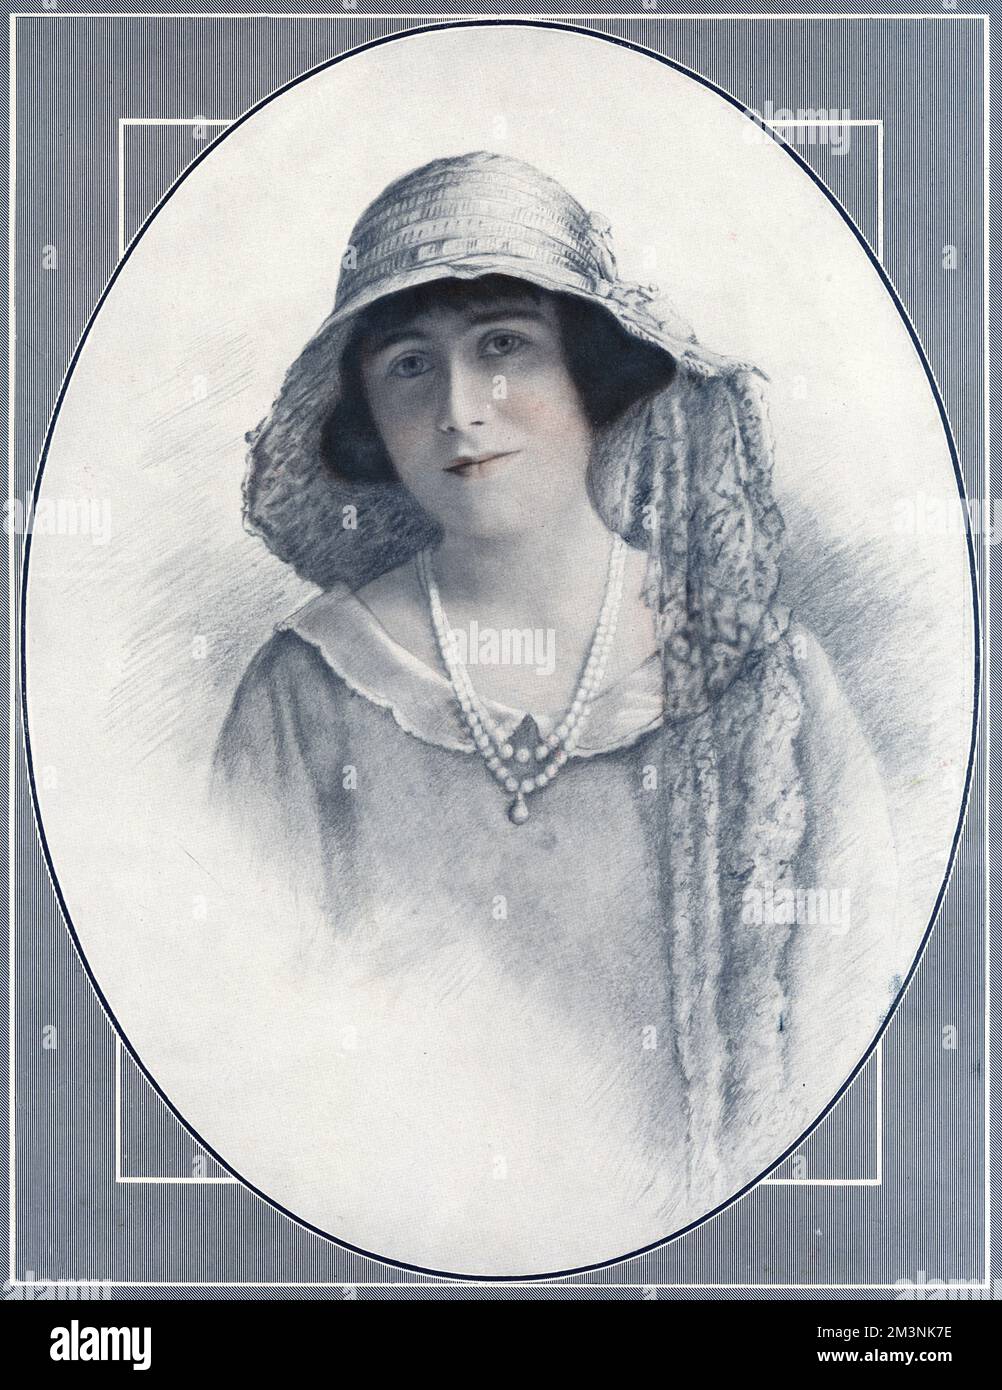 Lady Elizabeth Angela Margeurite Bowes-Lyon (1900-2002), Duchess of York, later Queen Elizabeth, the Queen Mother, portrayed in a special portrait by C. Vandyk to celebrate her marriage to Prince Albert, Duke of York on 26 April 1923 at Westminster Abbey,     Date: 1923 Stock Photo